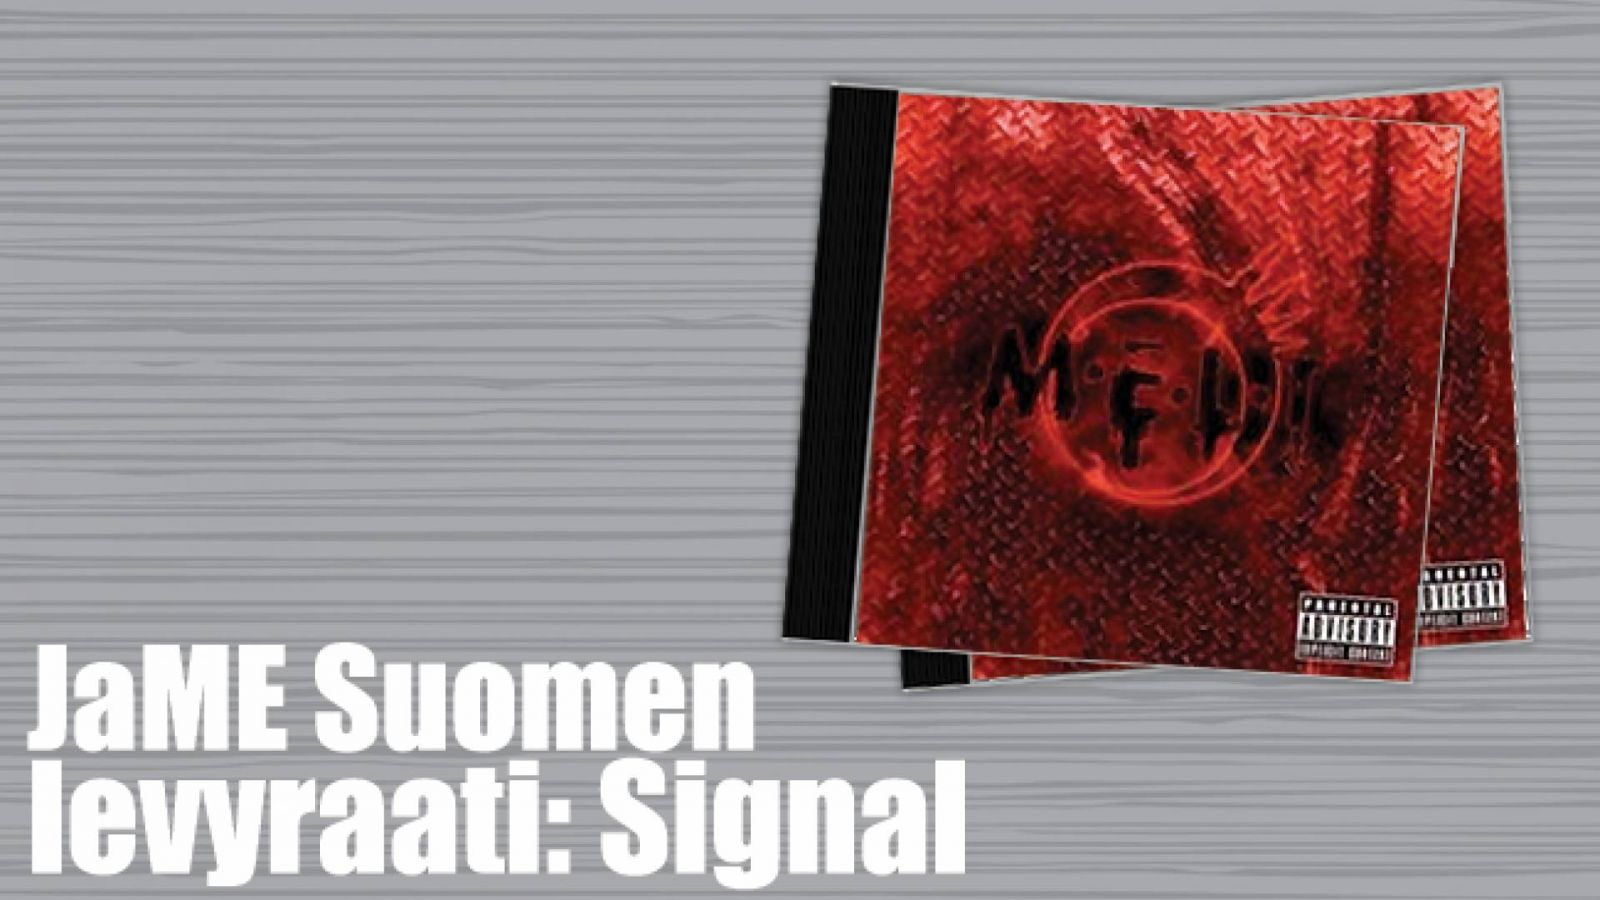 JaME Suomen levyraati: Signal © All Rights Reserved